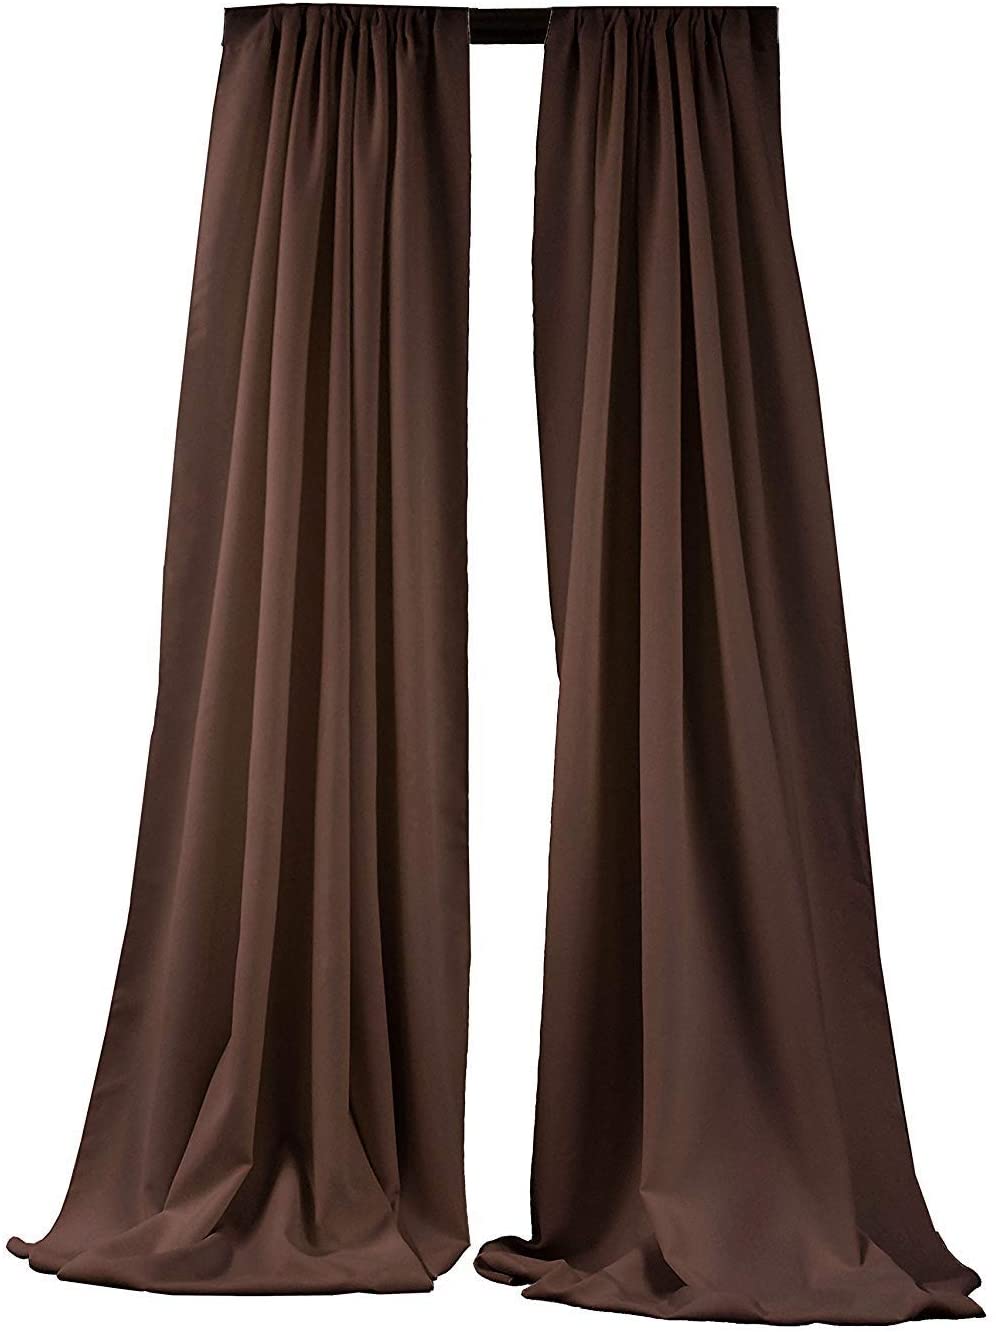 2 Panels 5 Feet Wide Polyester Seamless Backdrop Drape Curtain Panel - (Brown,